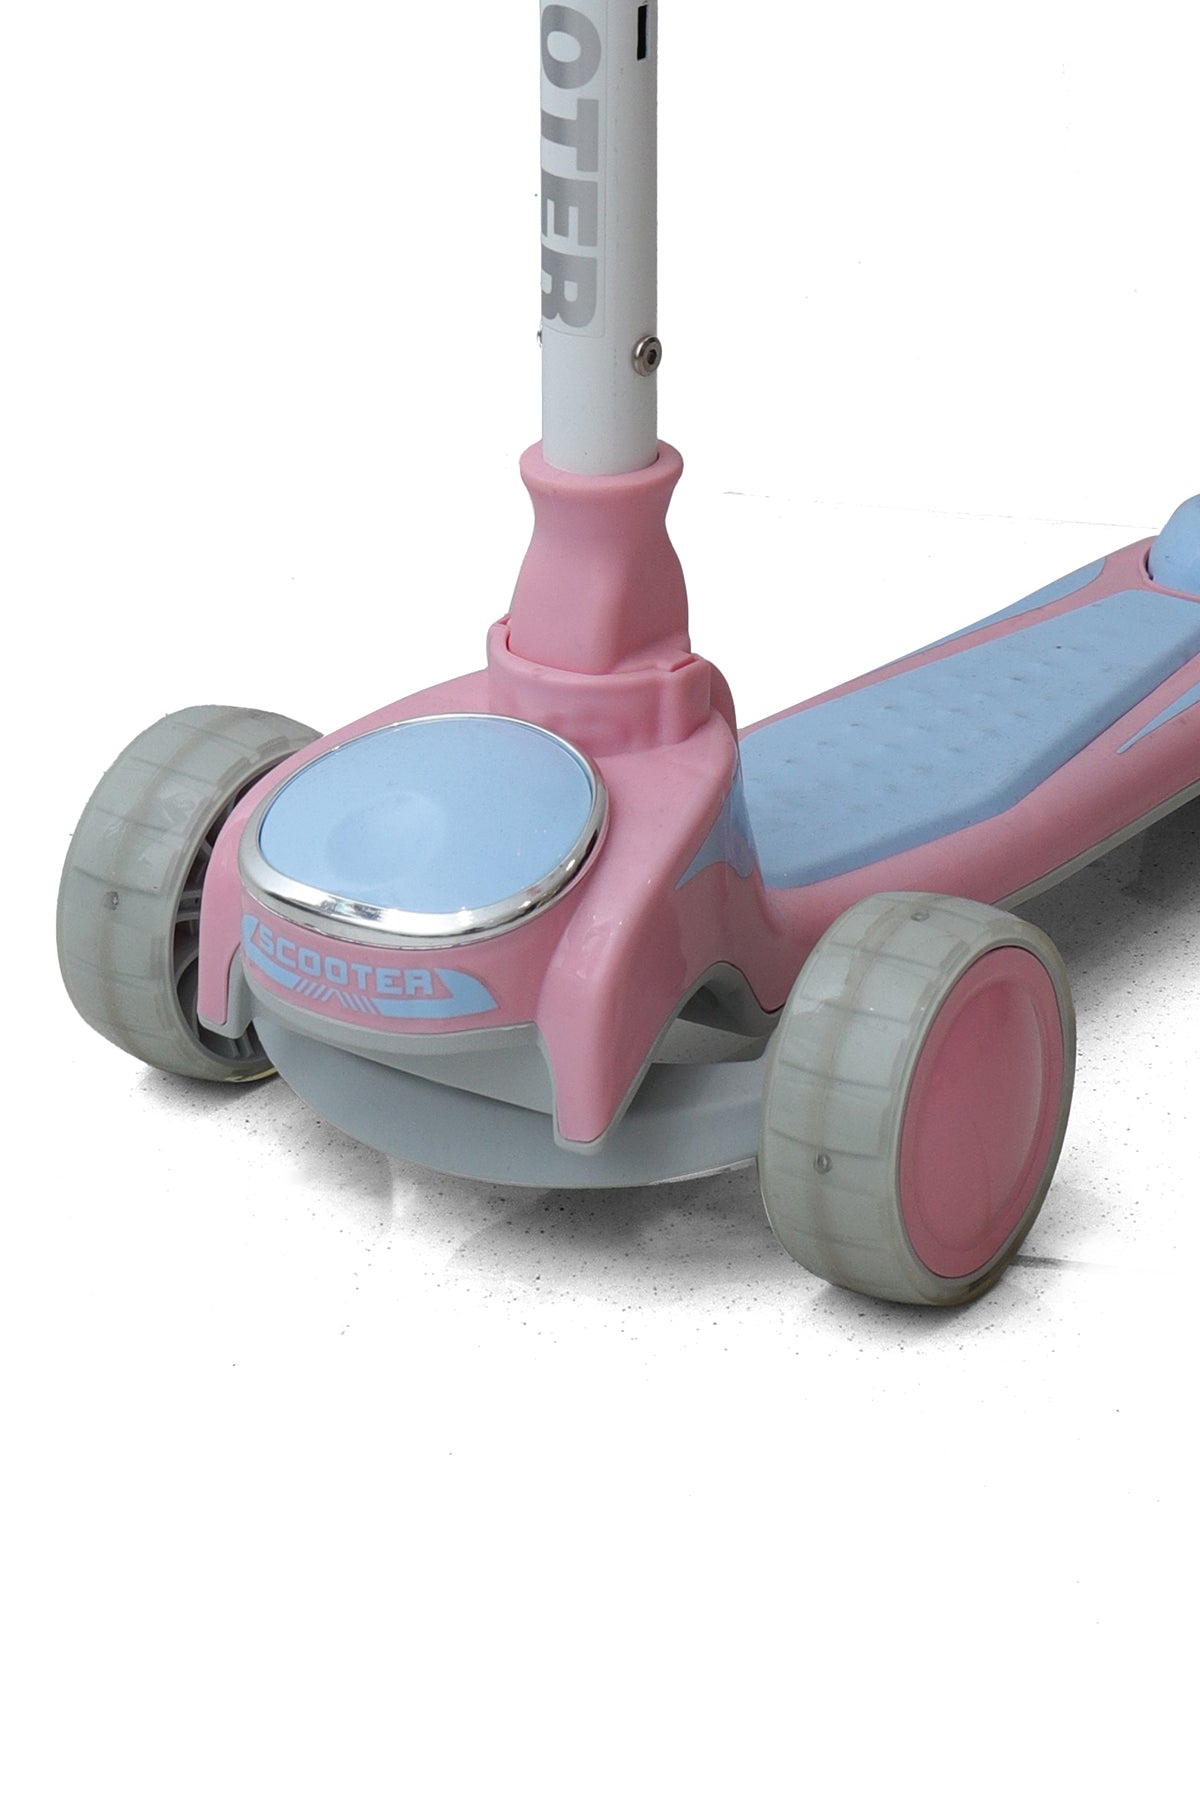 Scooter For Kids